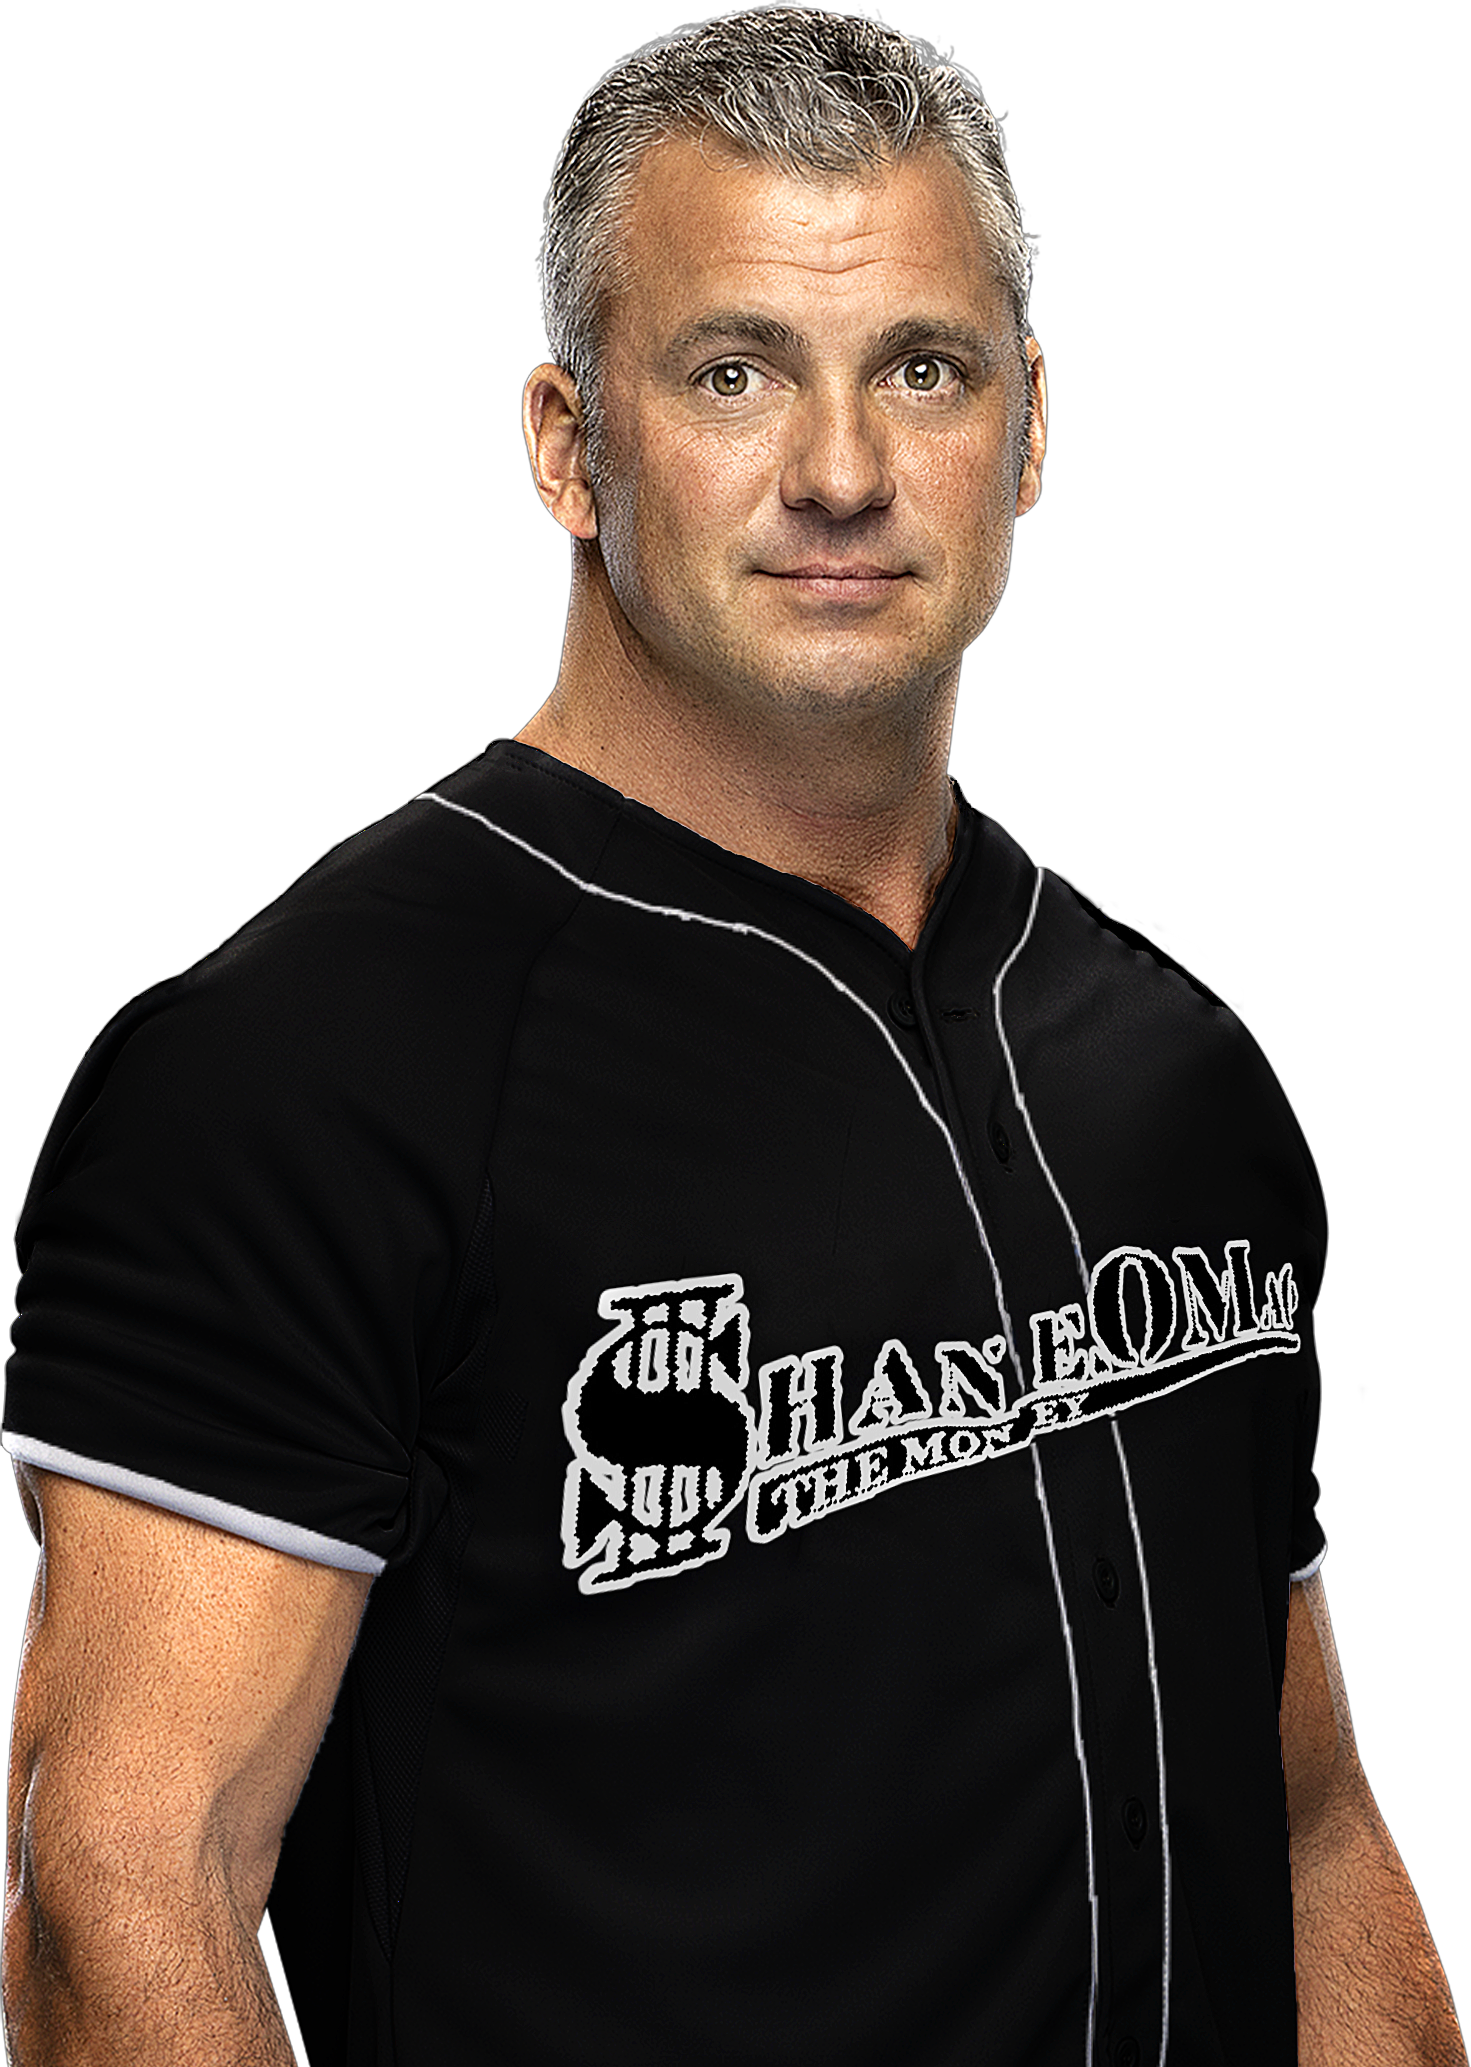 All Shane McMahon Wrestling Action Figures